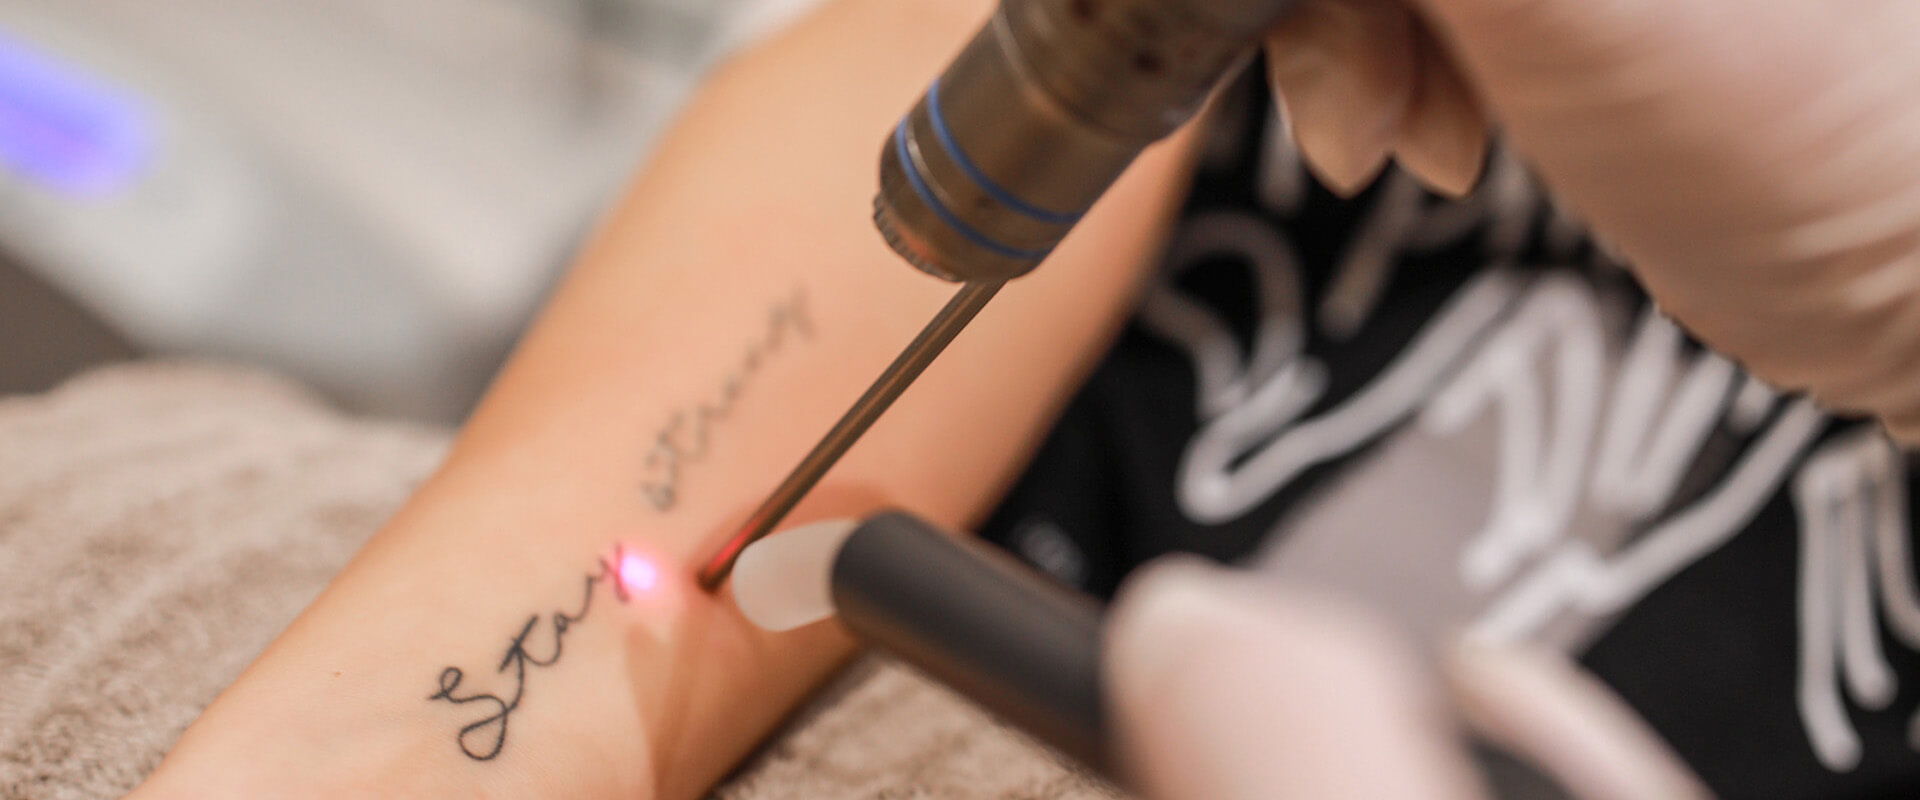 aftercare tattoo removal